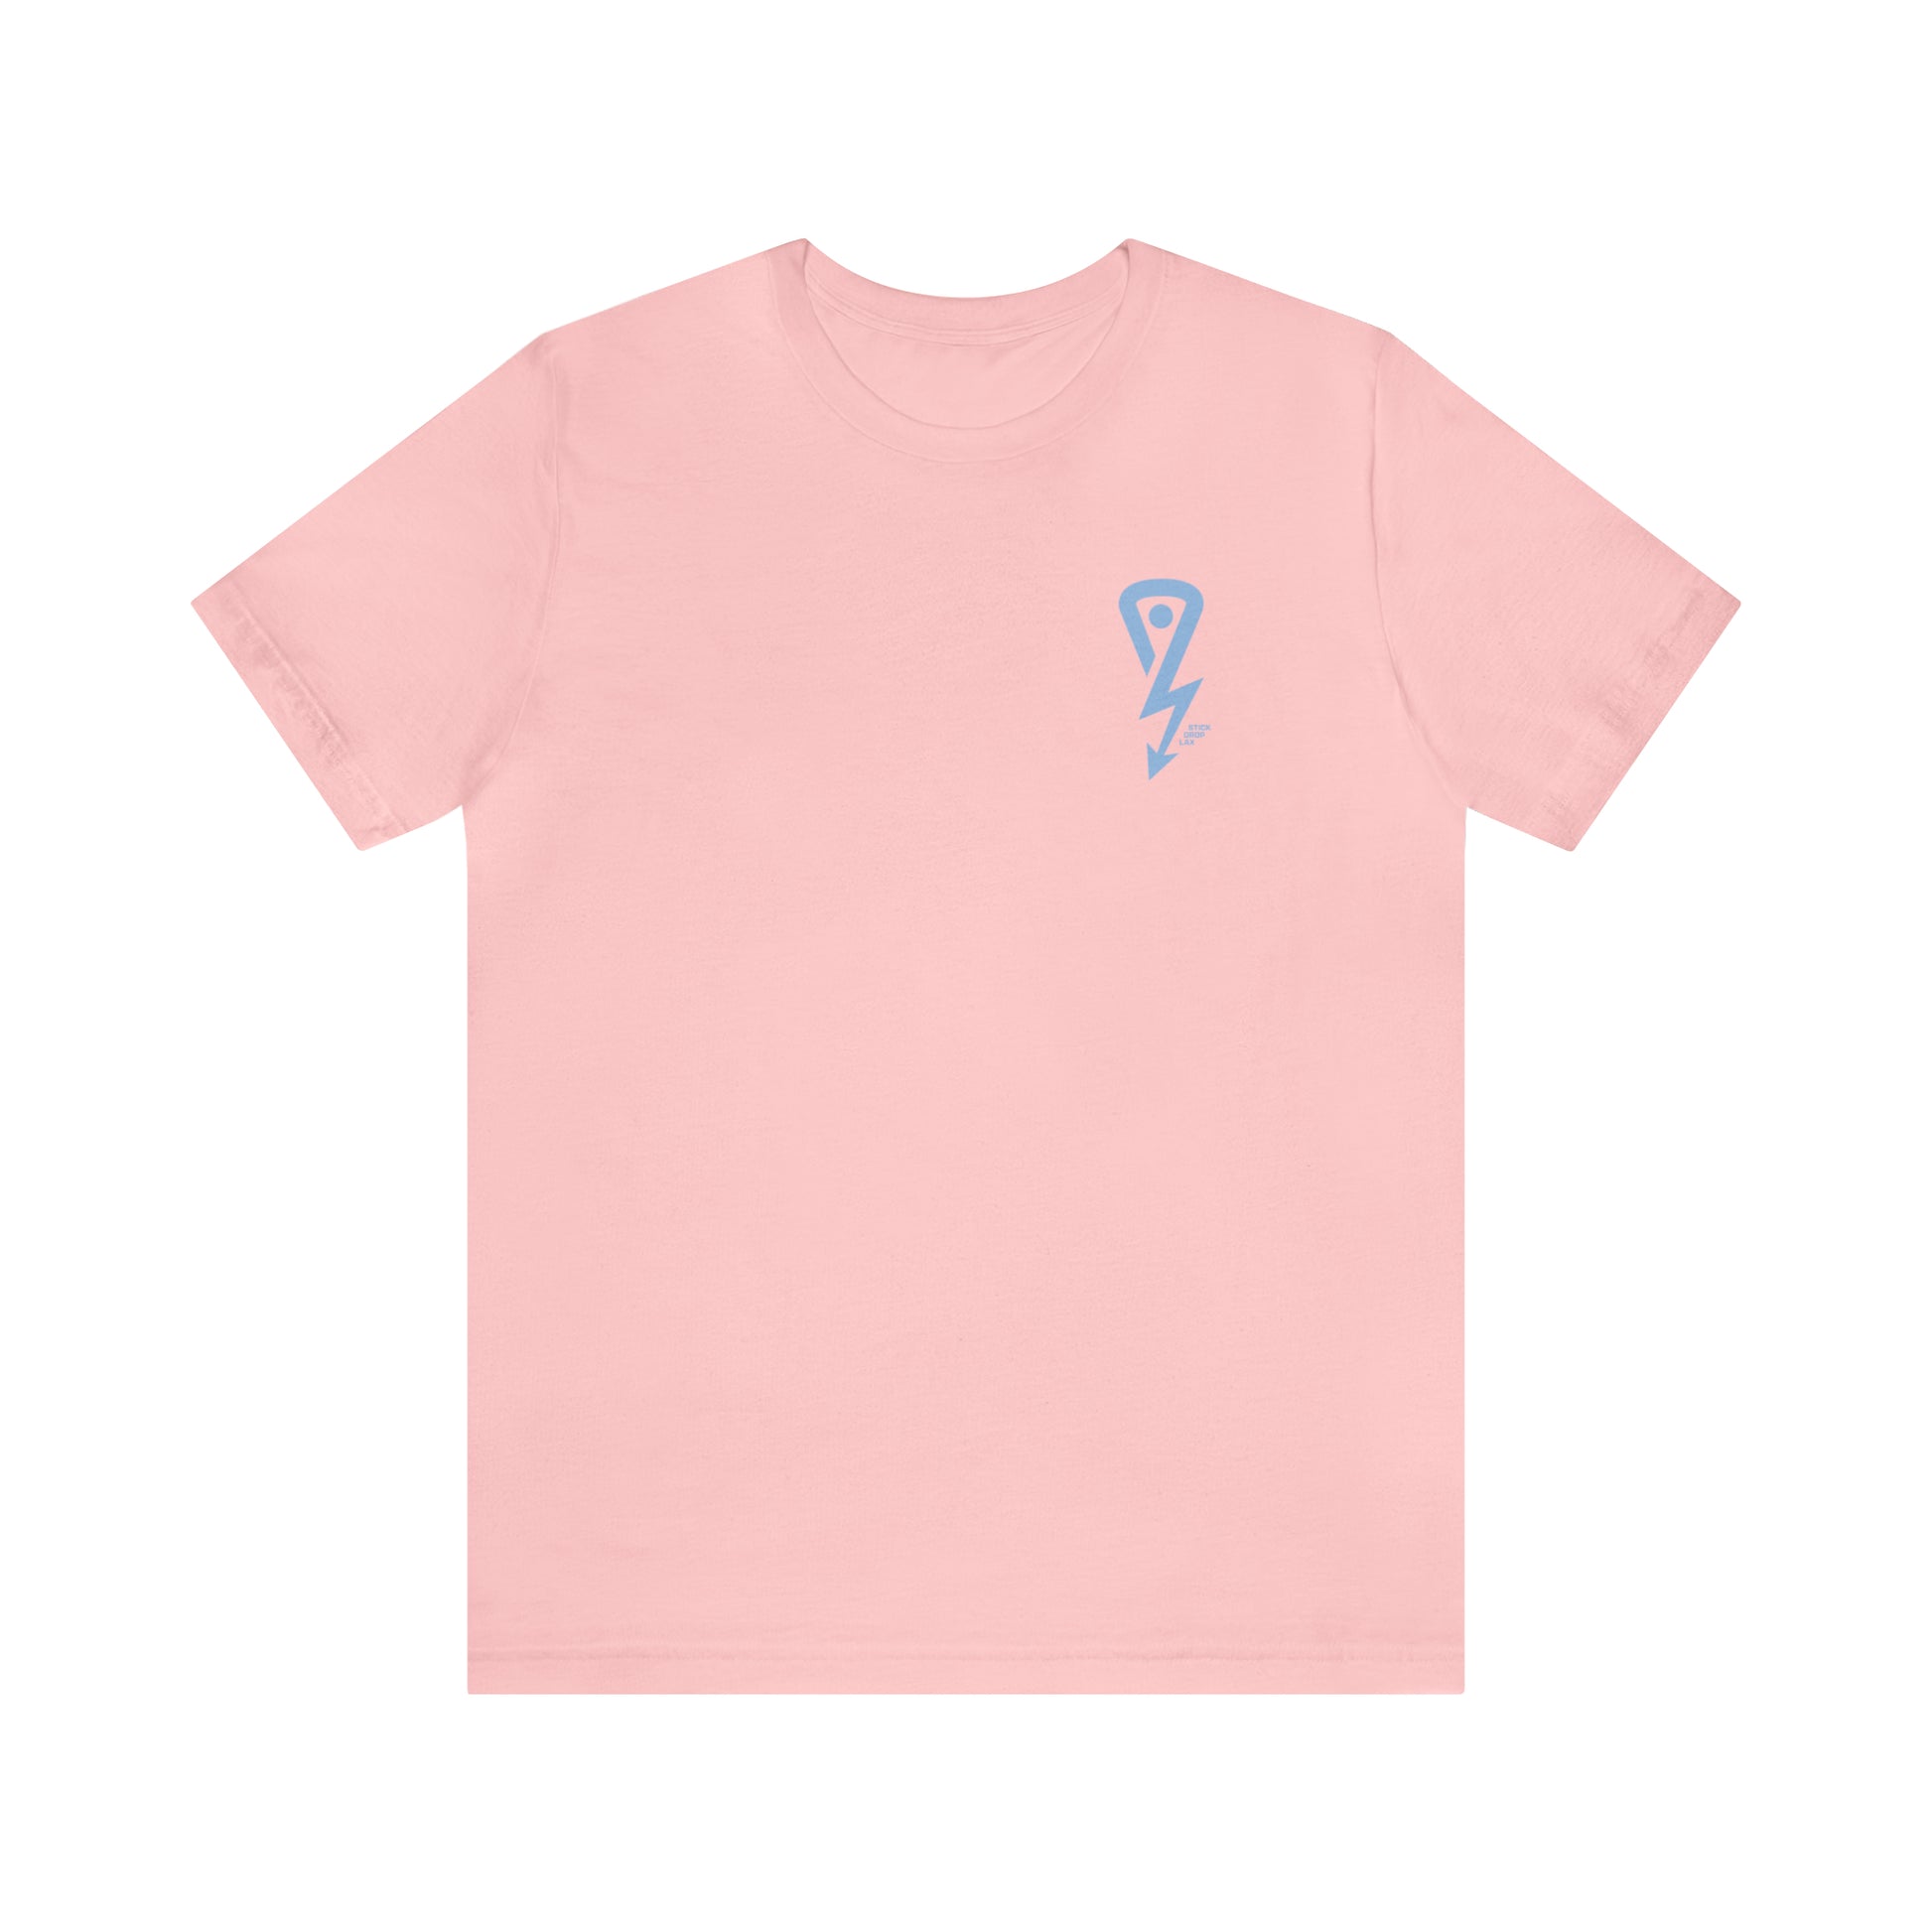 Pink Stick Drop Lax Script Front/Back T-shirt with white lettering and blue lax sticks